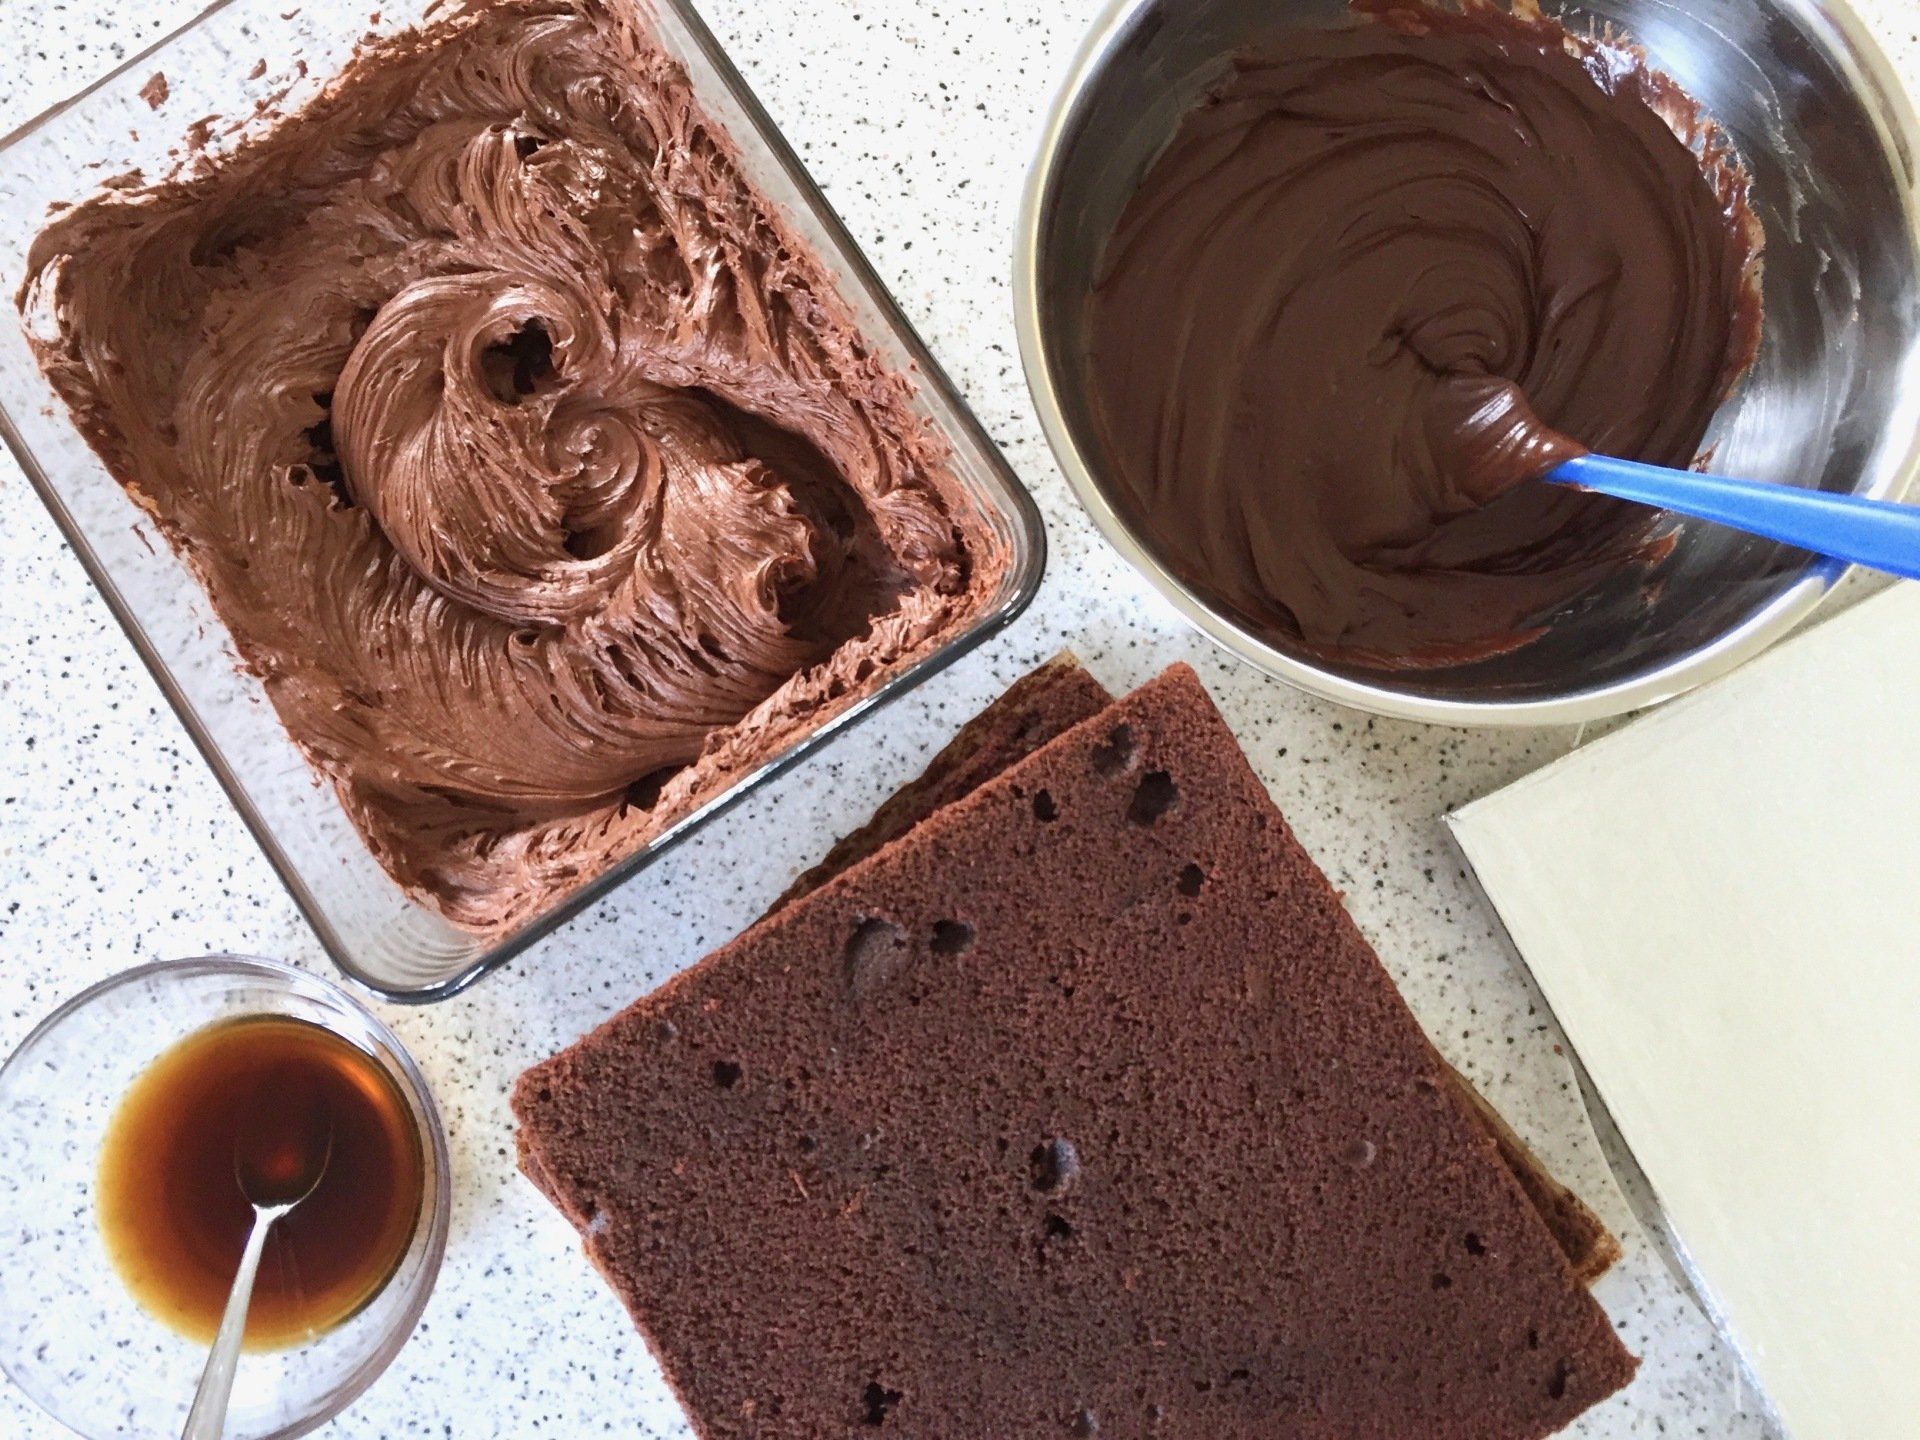 Chocolate cake components